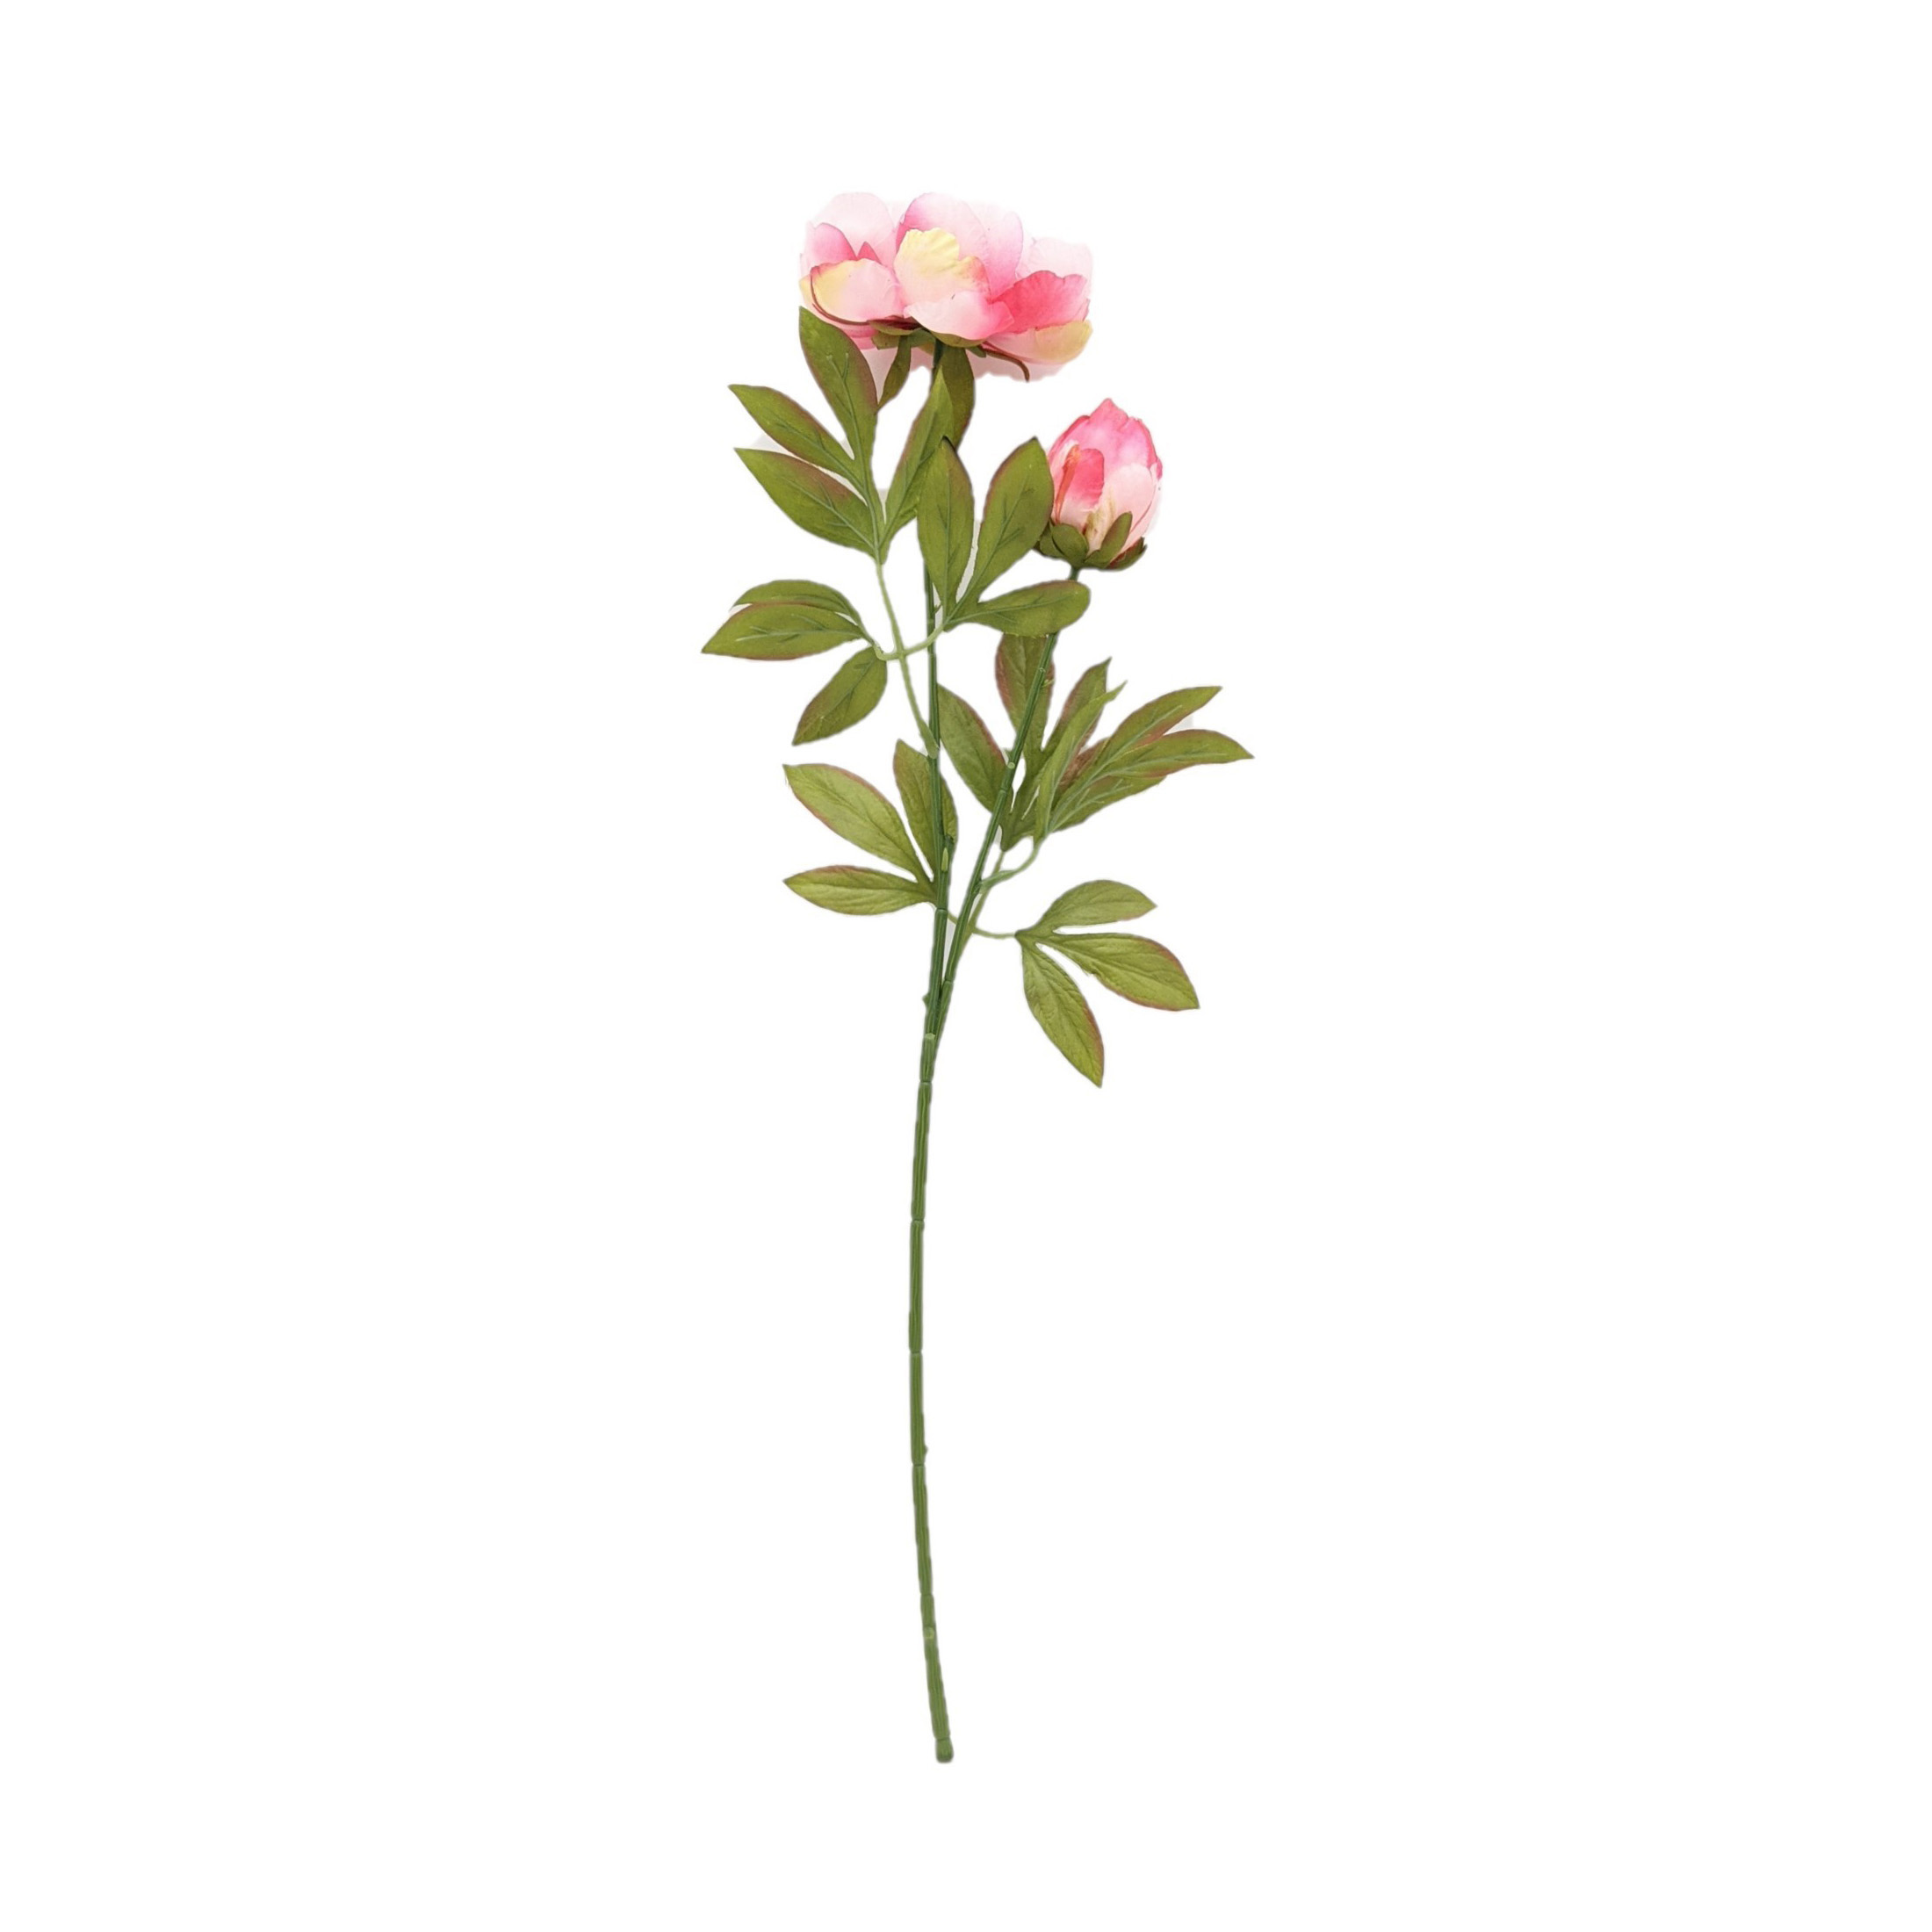 Mainstays 27 inch Tall Artificial Pink Peony Flower Indoor Stem, Size: 27 inch